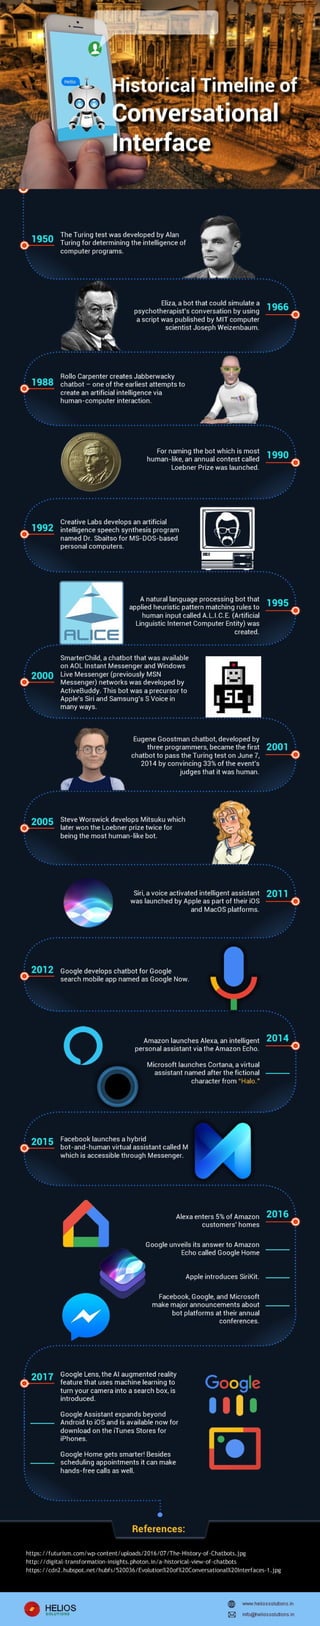 Historical Timeline of Conversational Interface